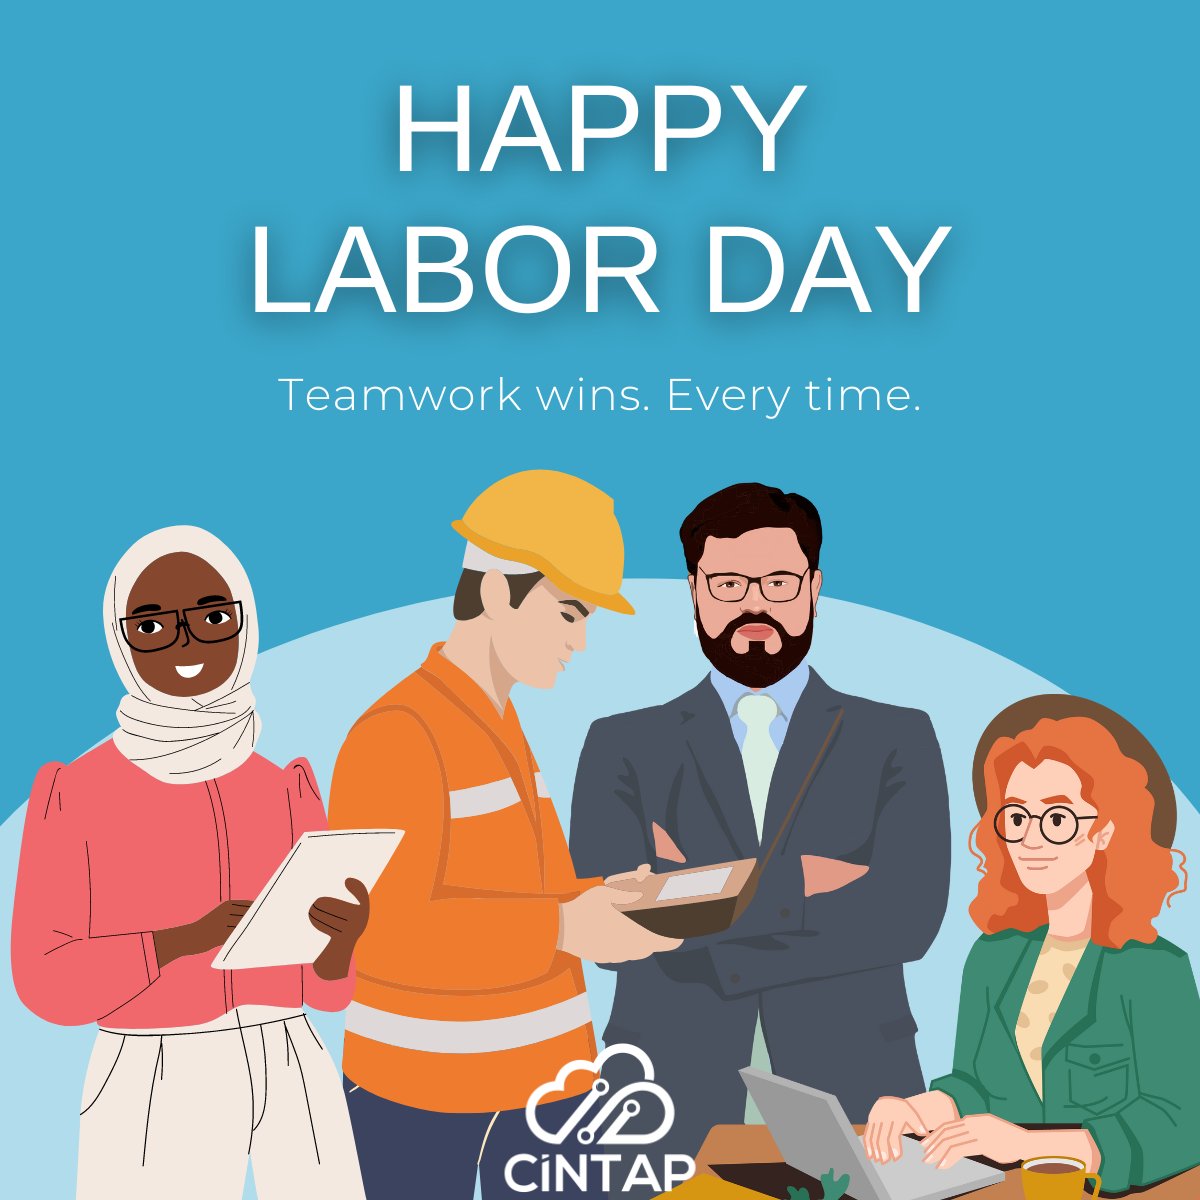 We hope you were able to take a break from your hard work for a Happy Labor Day!

#laborday2023